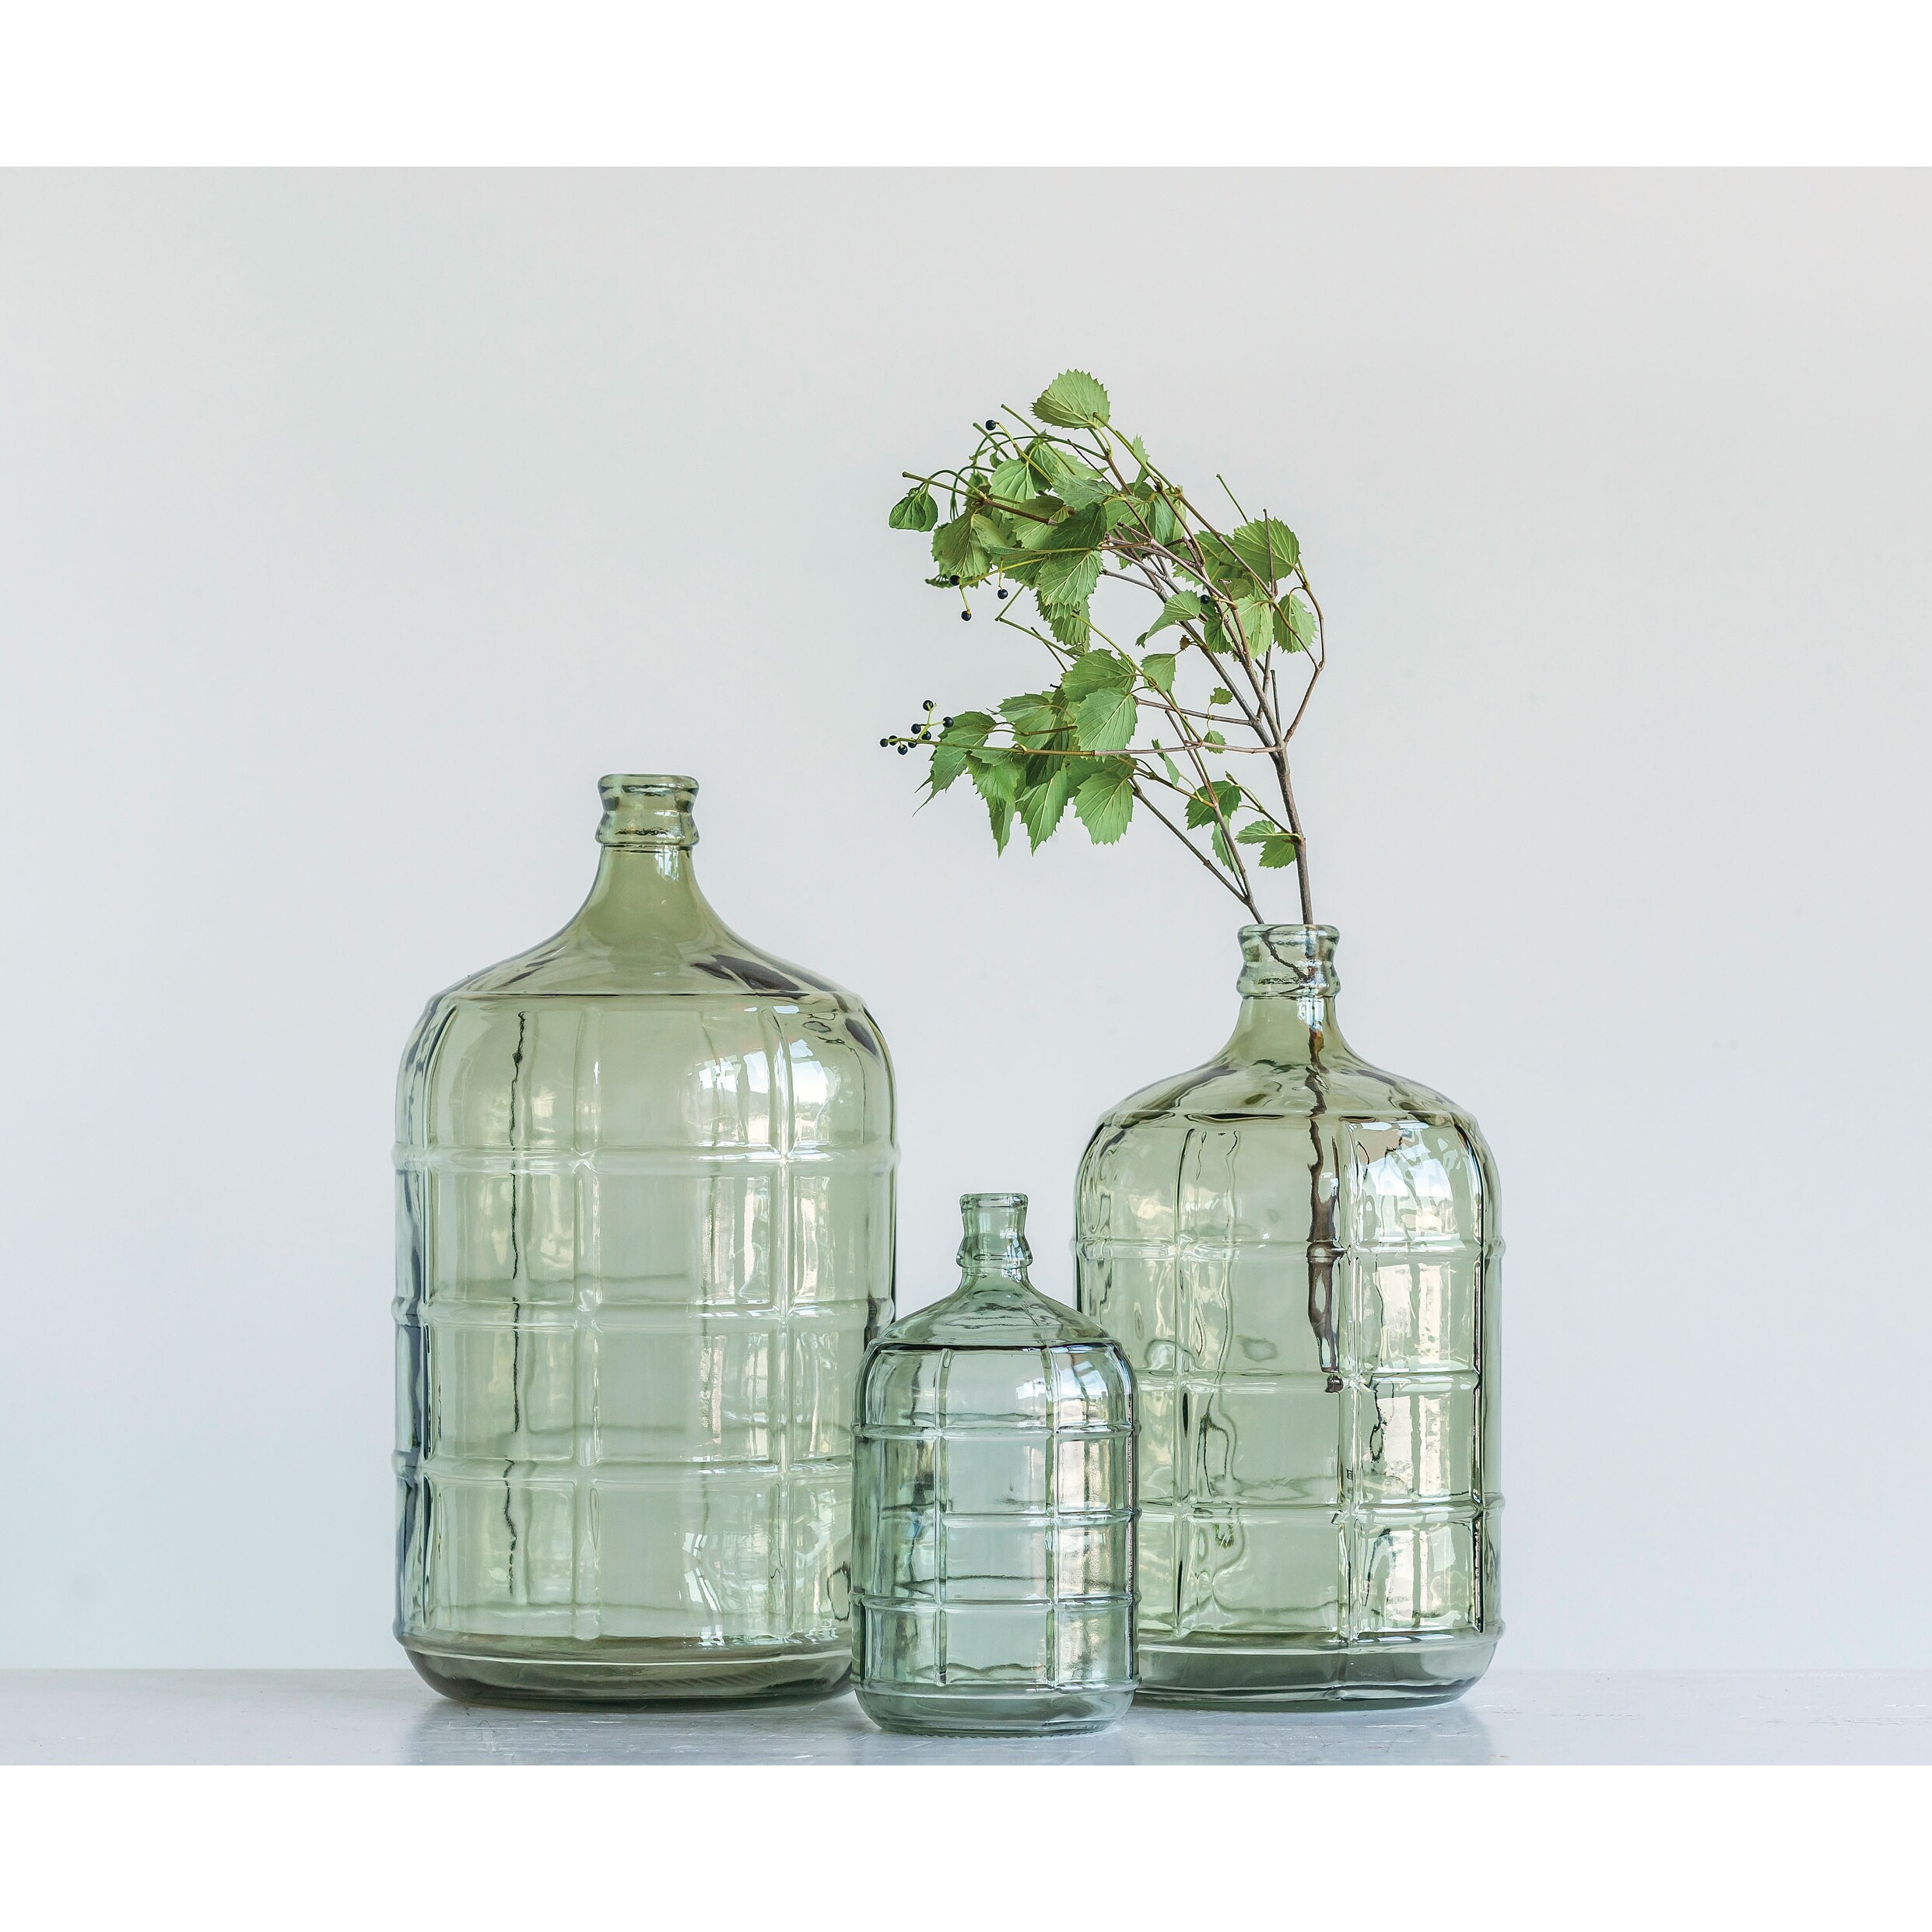 https://ak1.ostkcdn.com/images/products/is/images/direct/f2495b7ab92ed9b02cafa5c05b3283b4b904c67c/Large-Transparent-Green-Vintage-Reproduction-Glass-Bottle-with-Embossed-Windowpane-Design.jpg